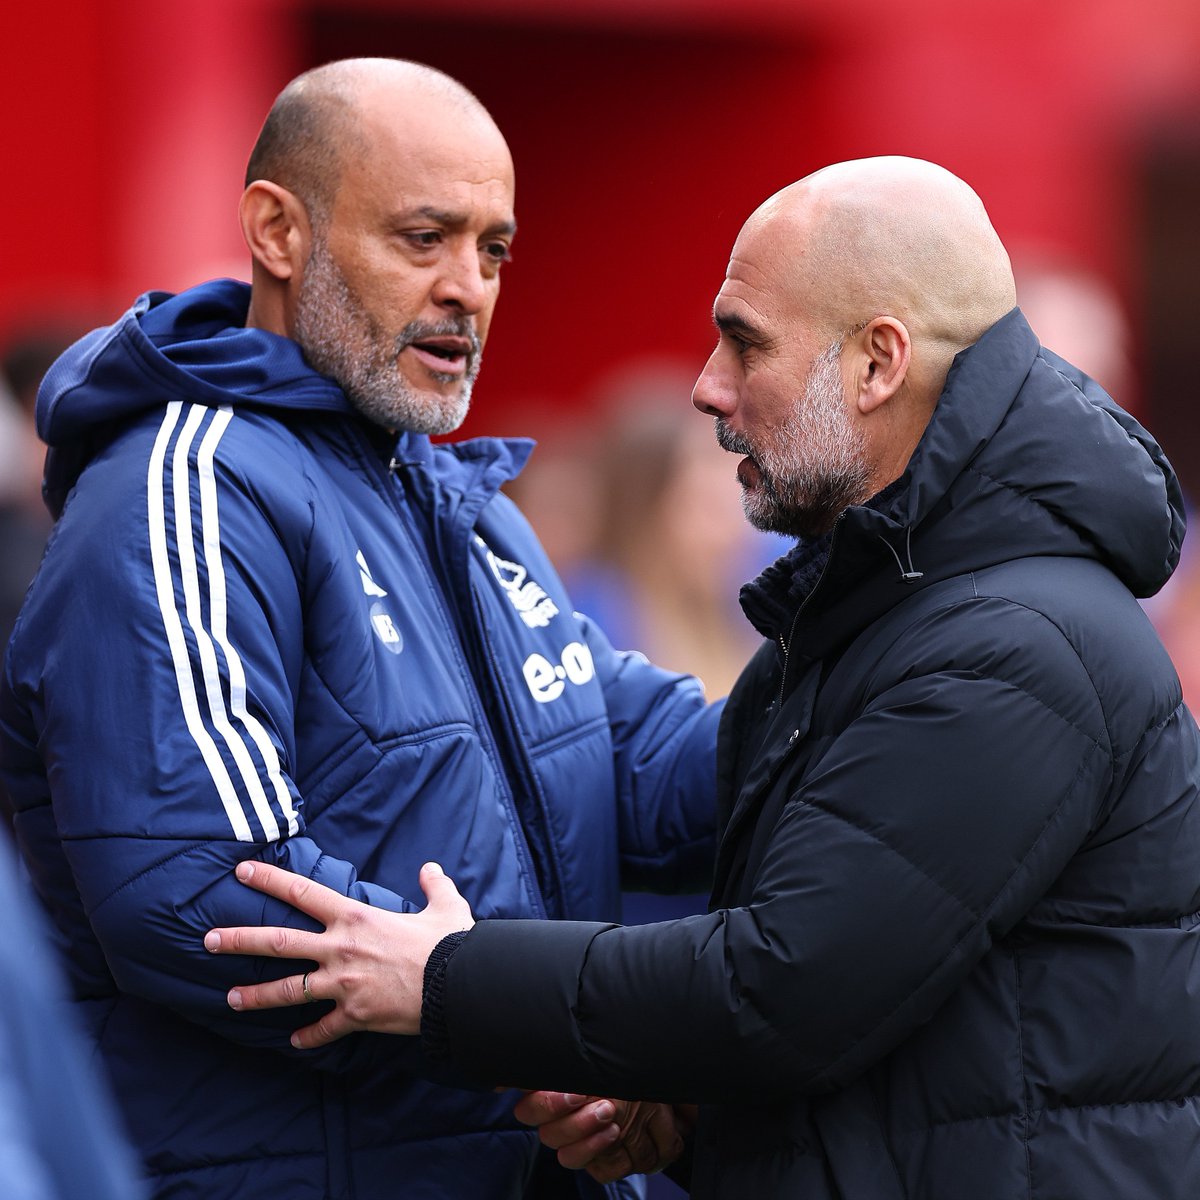 Teams to outshoot a Pep Guardiola side both home & away in the same season (league only) 

Real Madrid 09/10 ⚪️
Nottingham Forest 23/24 🤯

Via @OptaJoe